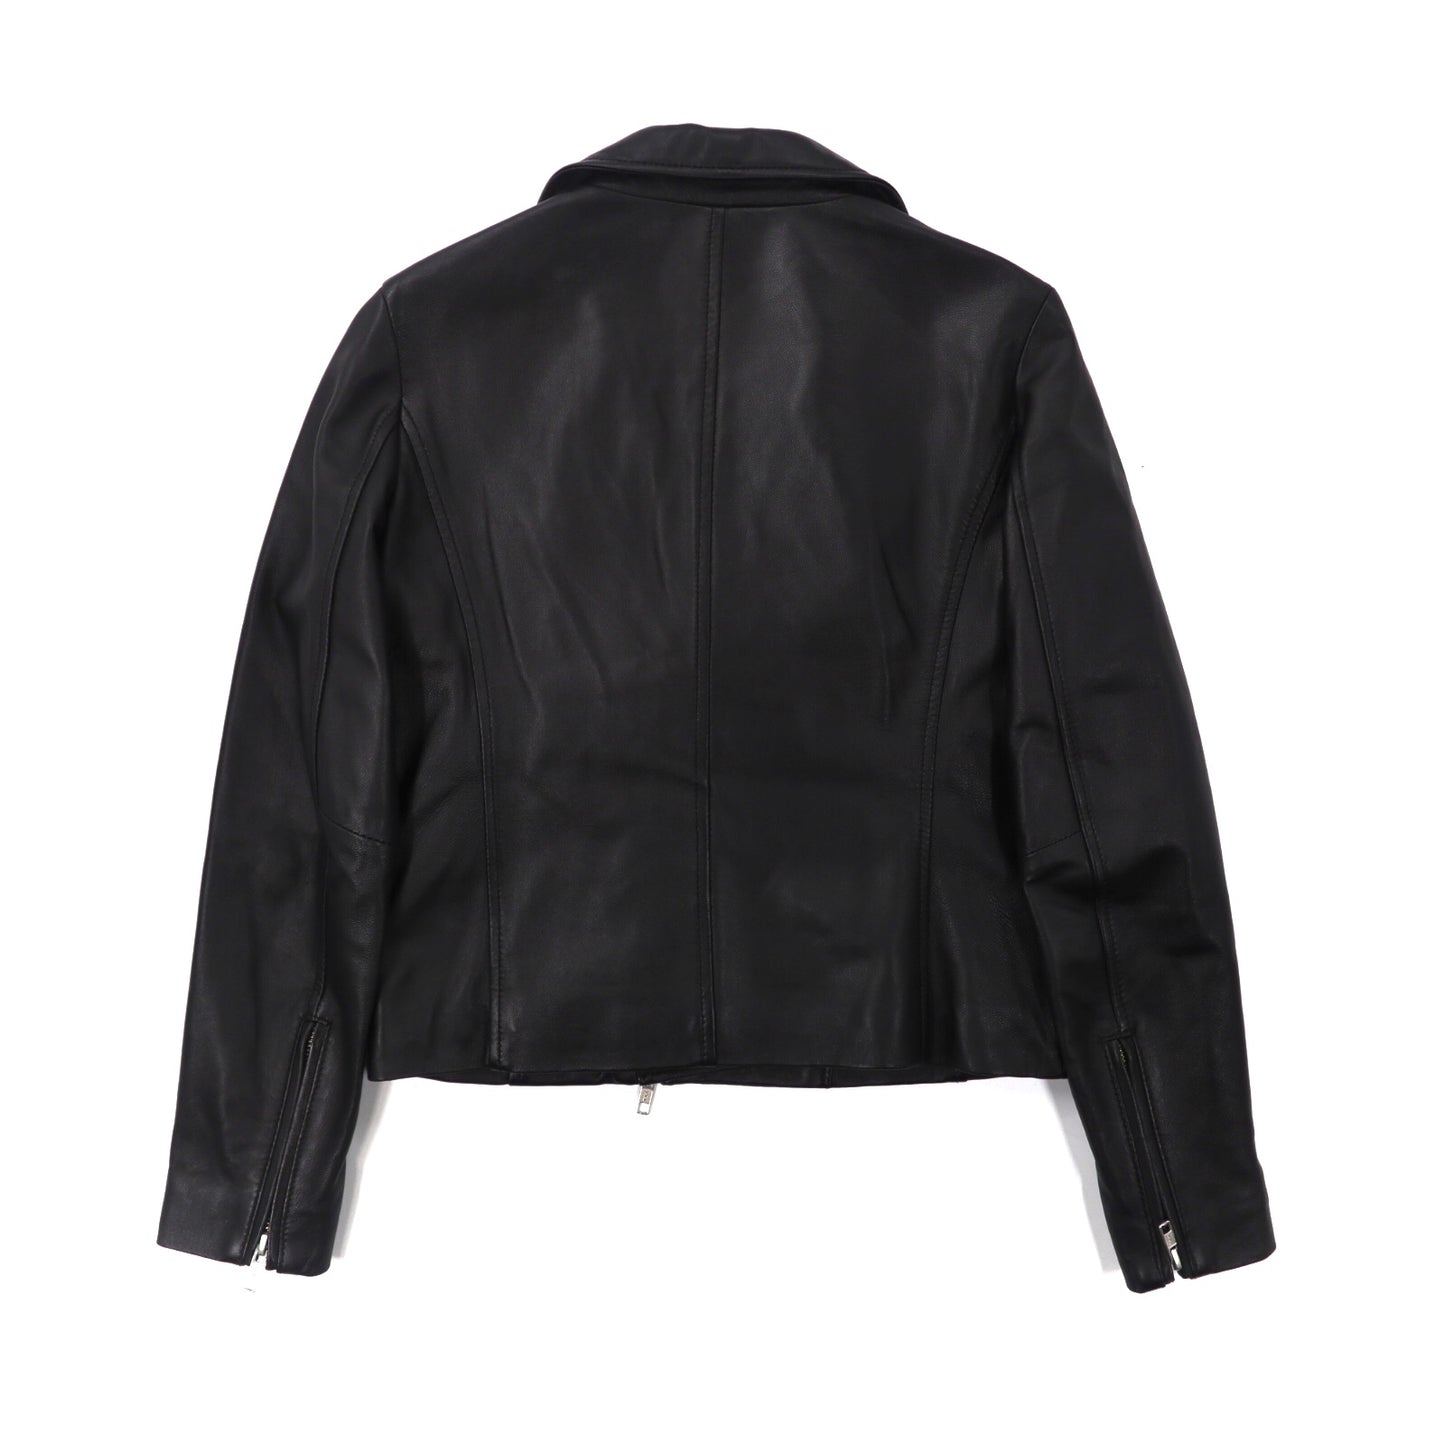 URBAN RESEARCH Double Riders Jacket 36 Black Ram Leather – 日本然